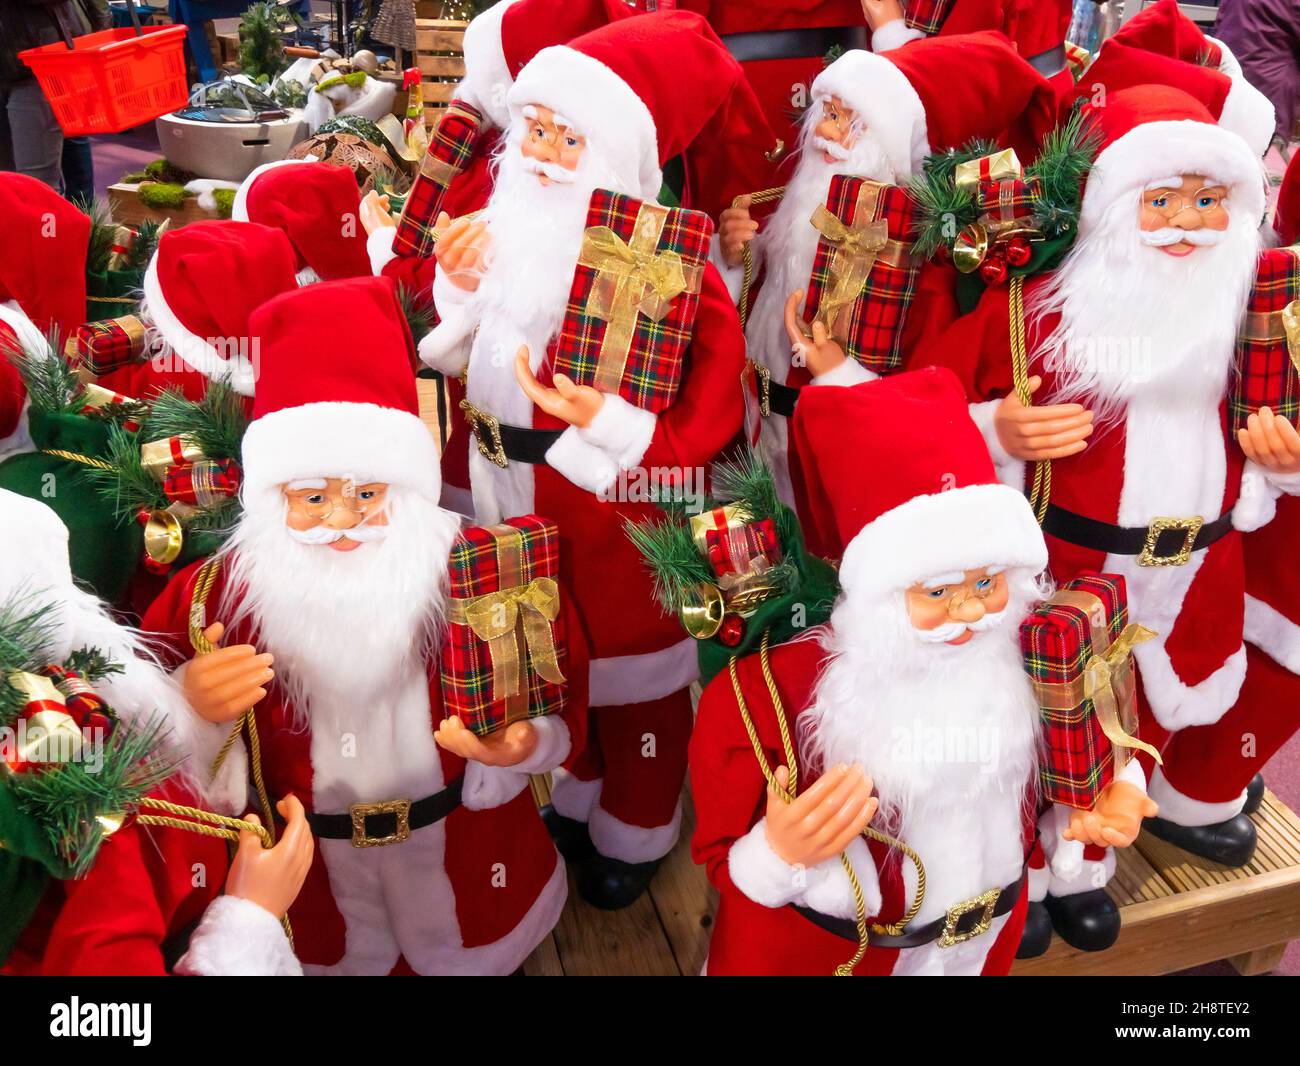 Display of Christmas decorations of Father Christmas or Santa Claus in a garden centre shop for the Christmas sale market Stock Photo